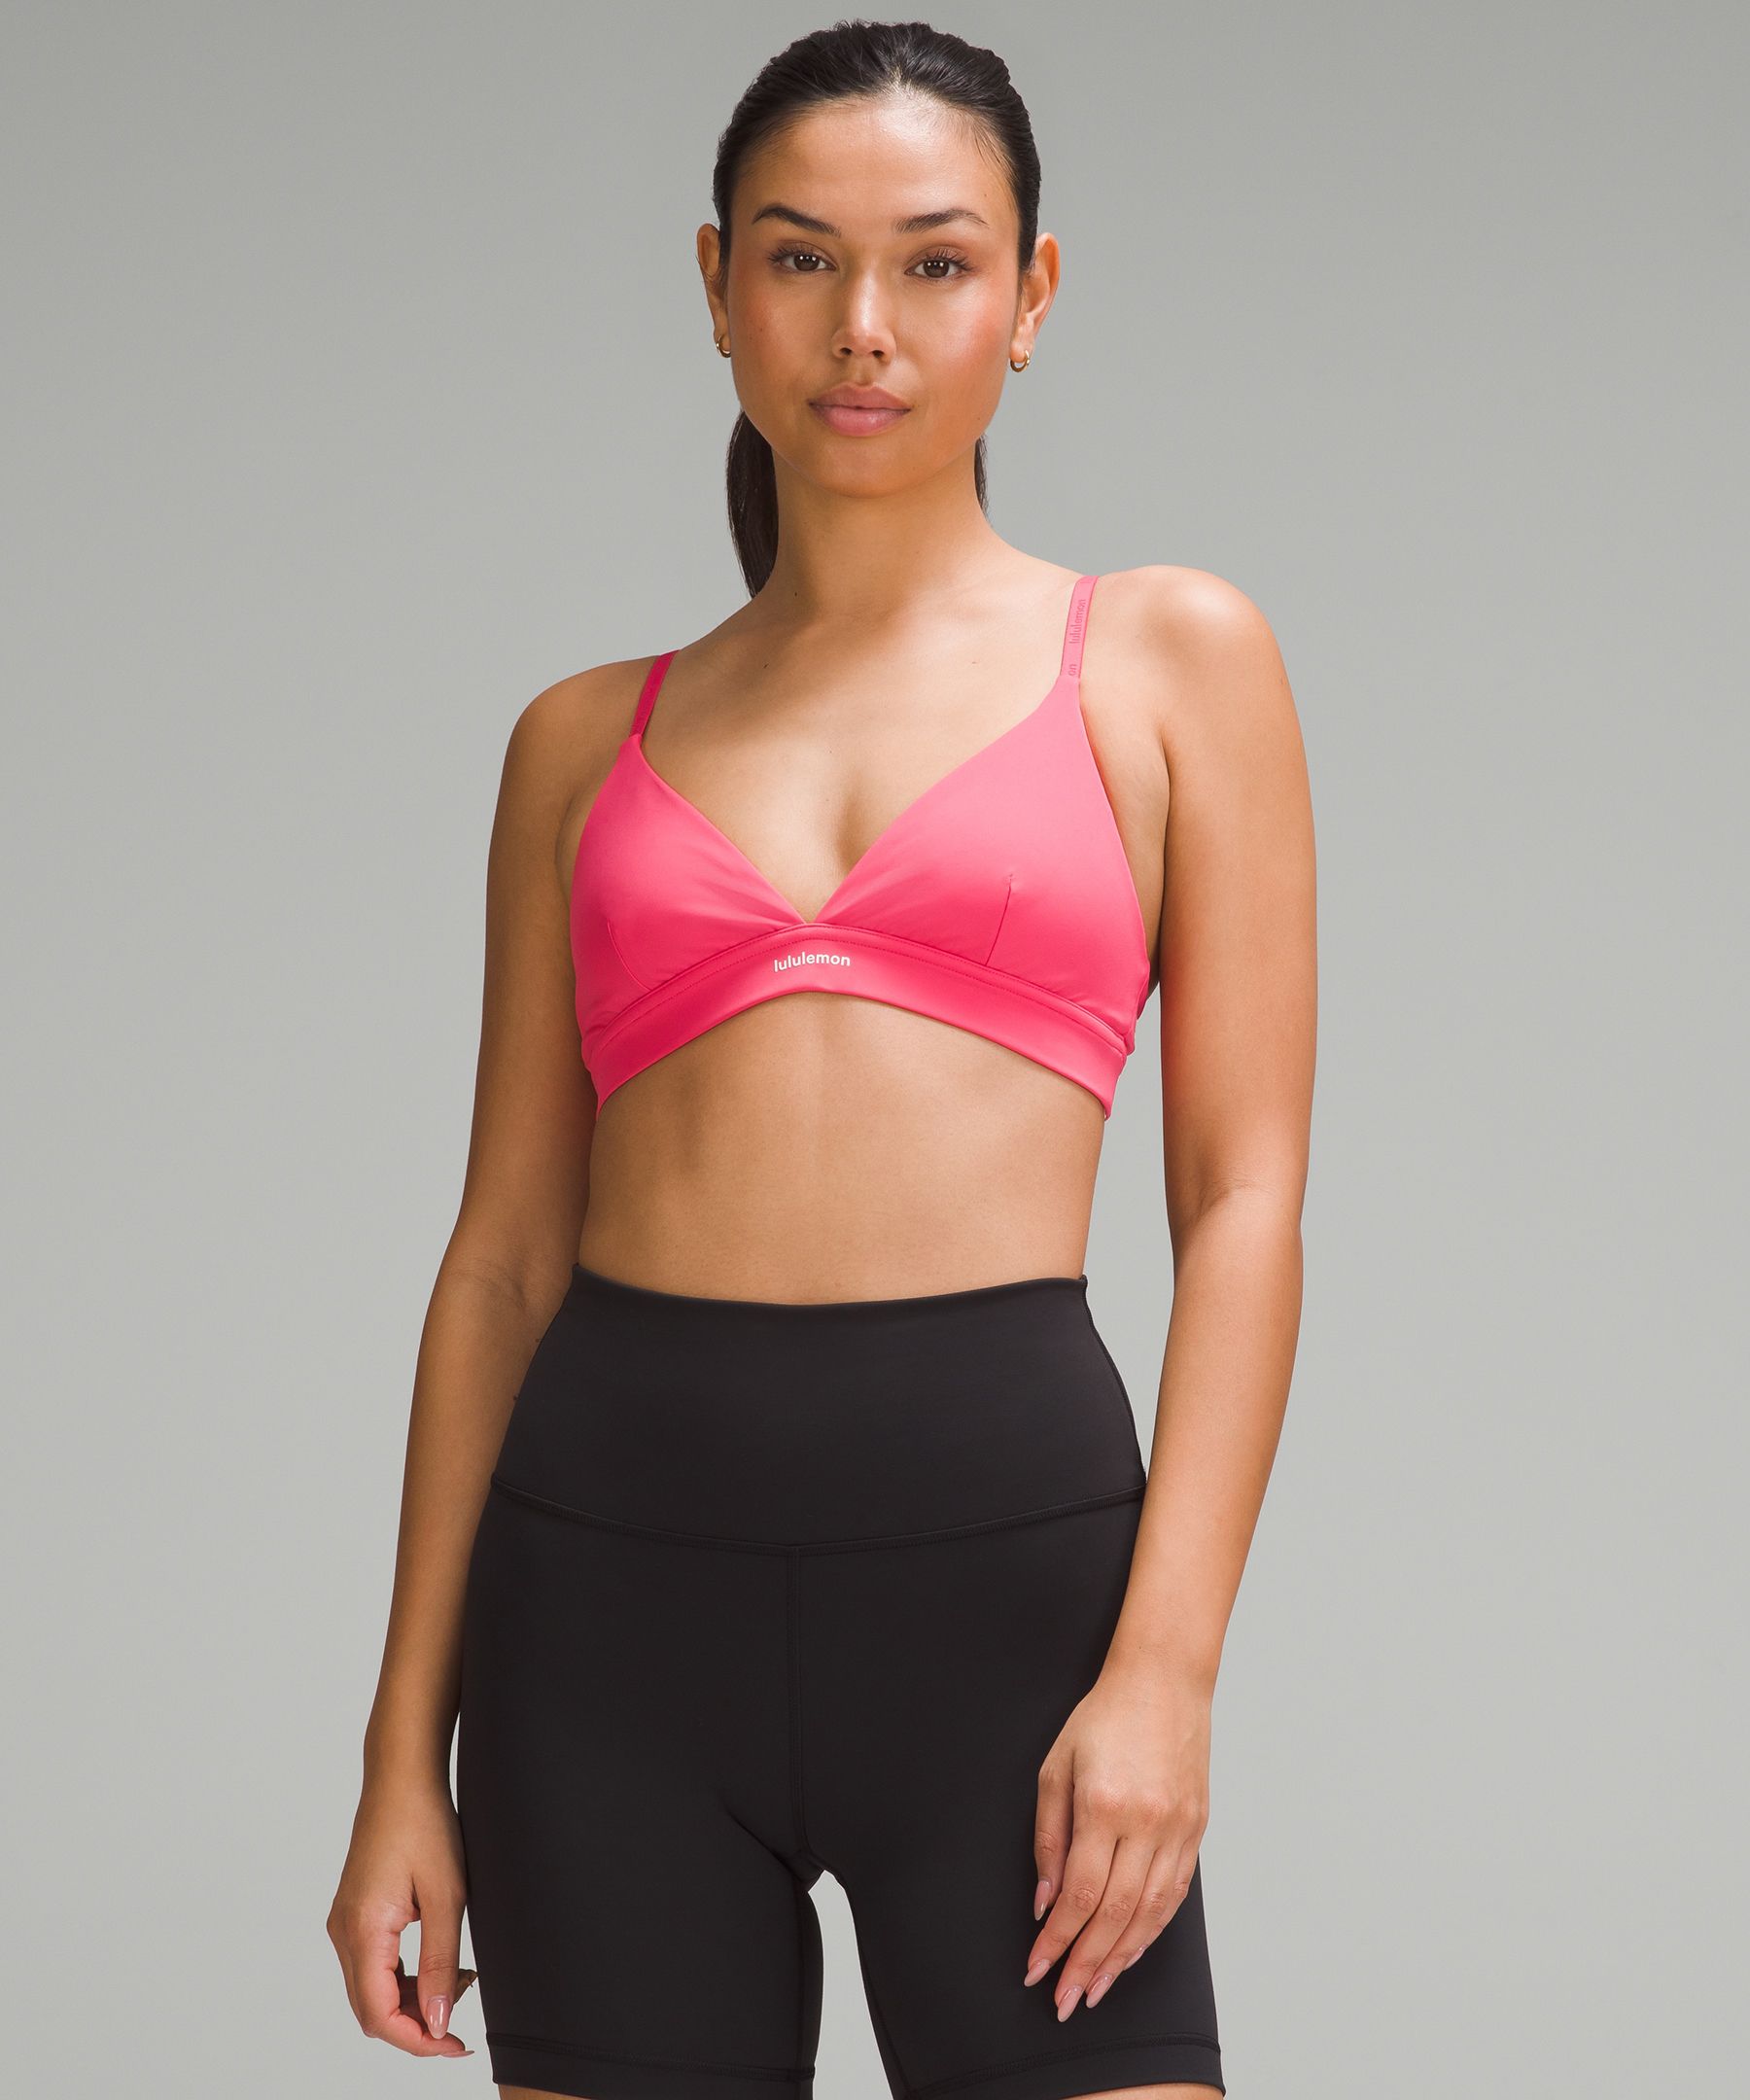 Lululemon Tata tamer bra in bumble, berry/red. Size 34D. Excellent  condition.